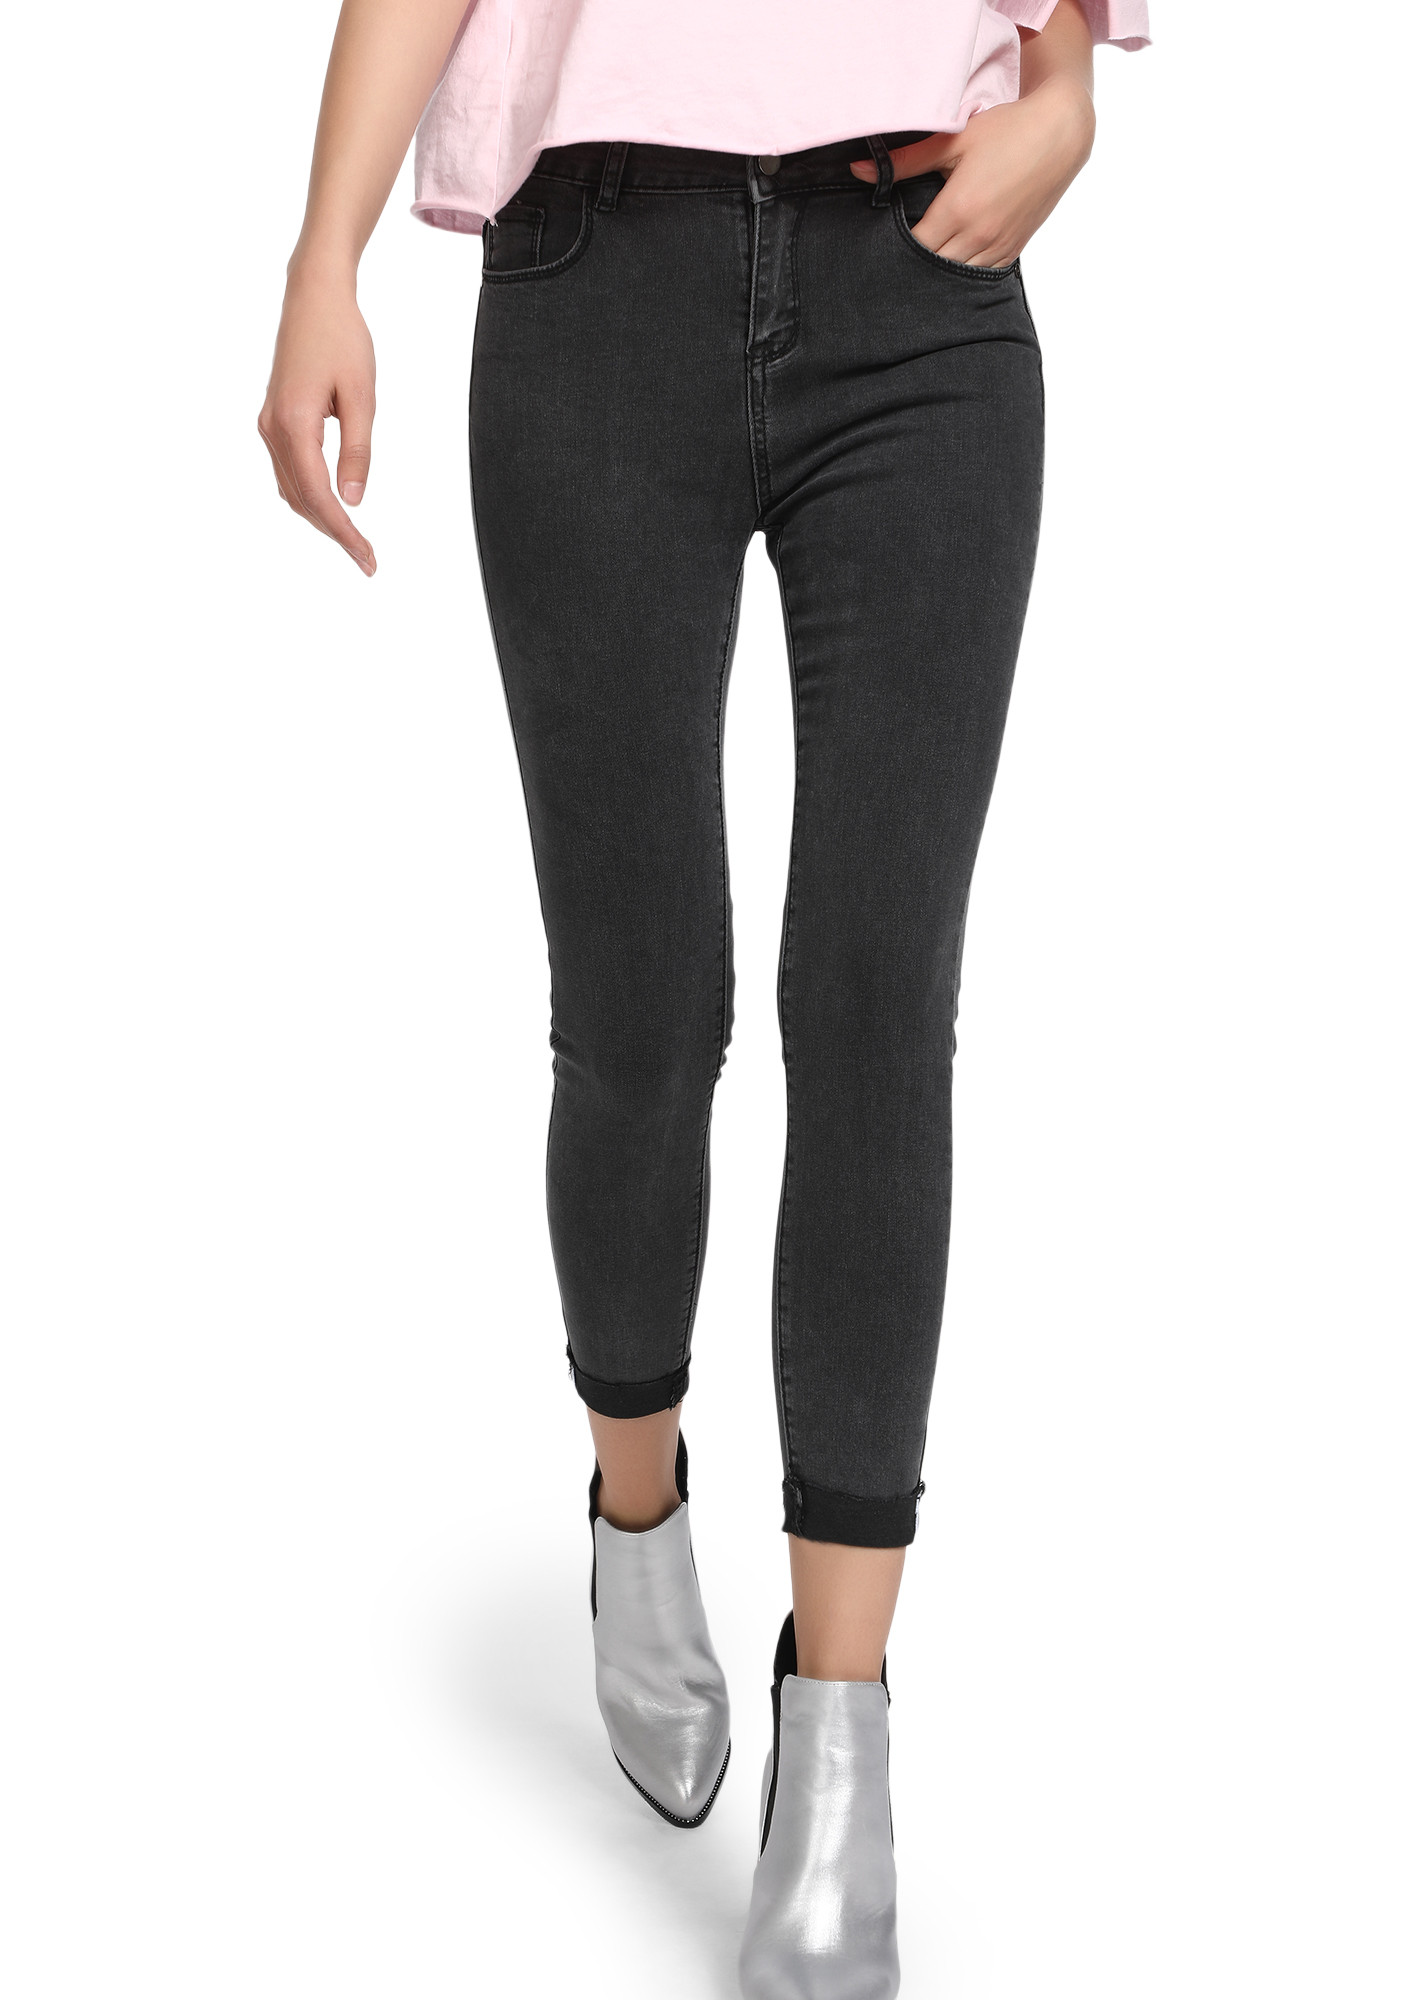 WHAT'S YOUR STYLE SCORE BLACK SKINNY JEANS